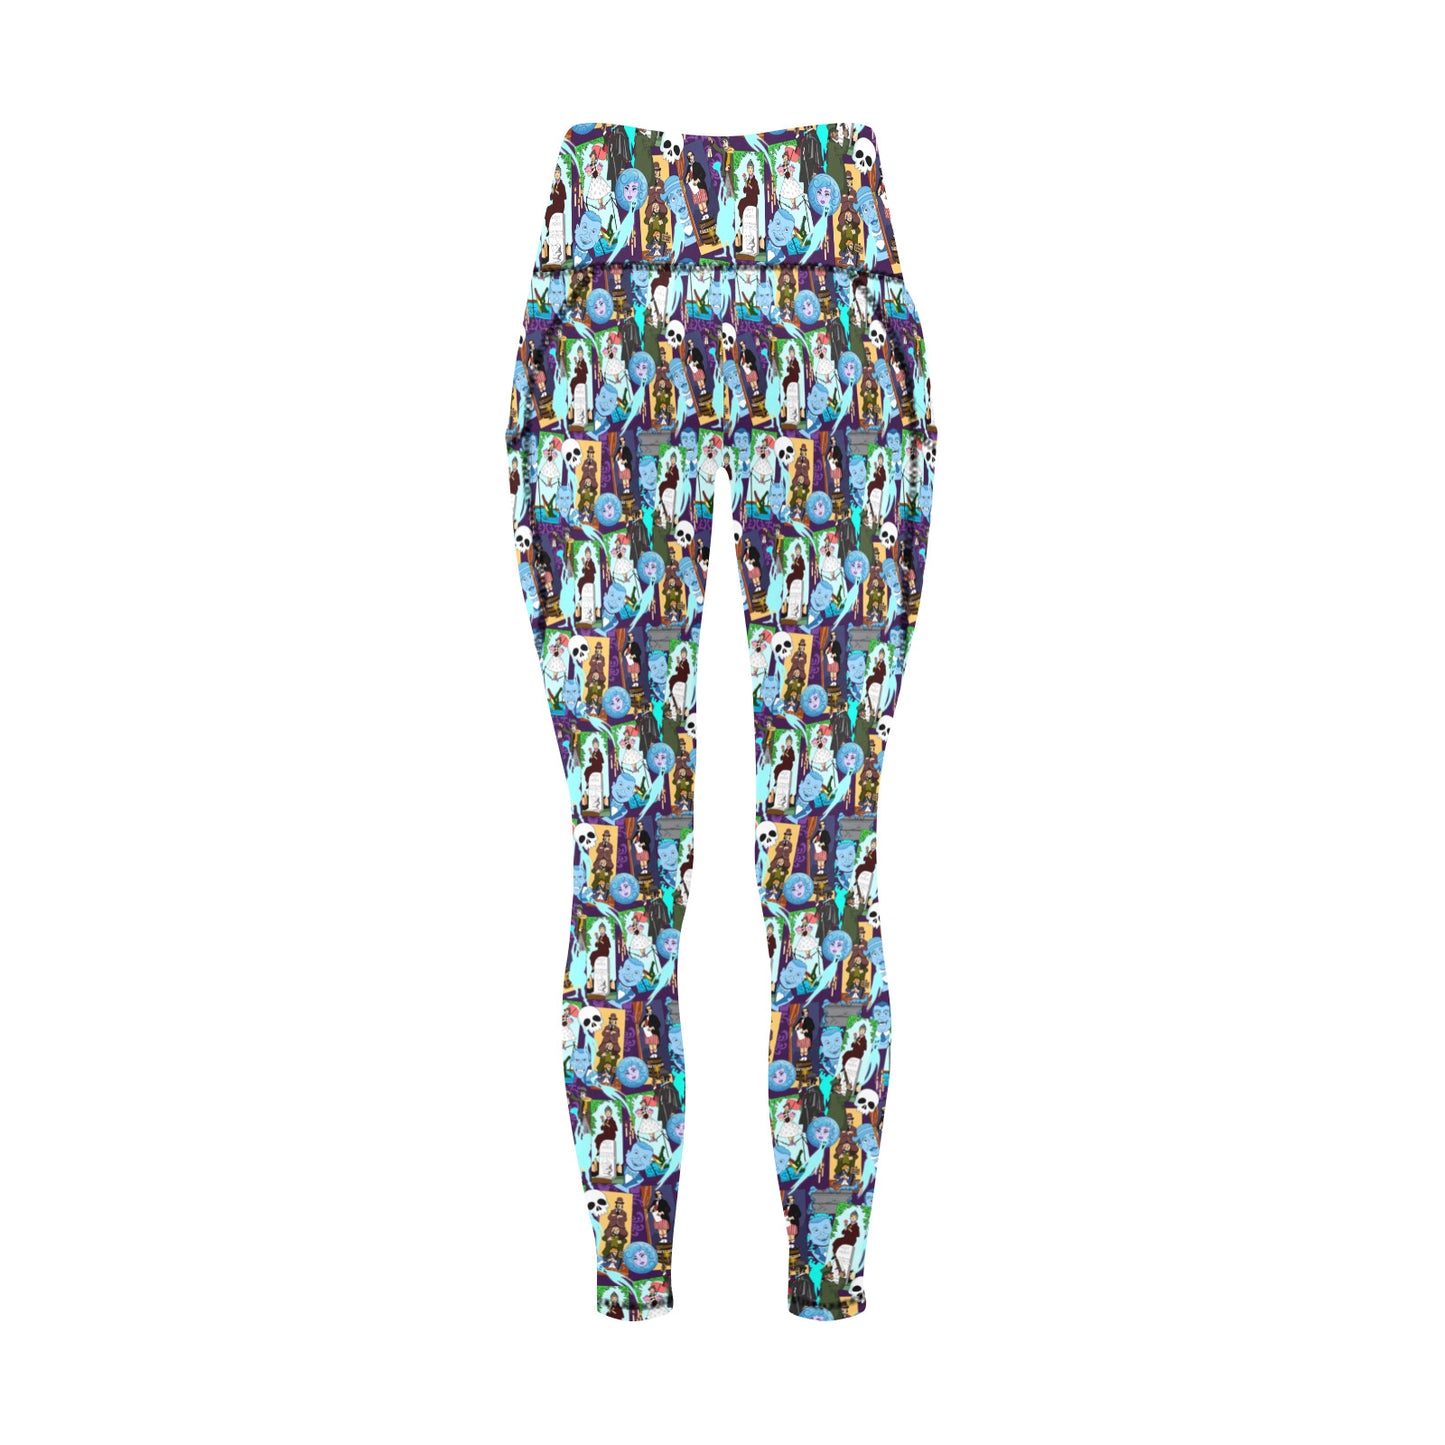 Haunted Mansion Favorites Women's Athletic Leggings With Pockets